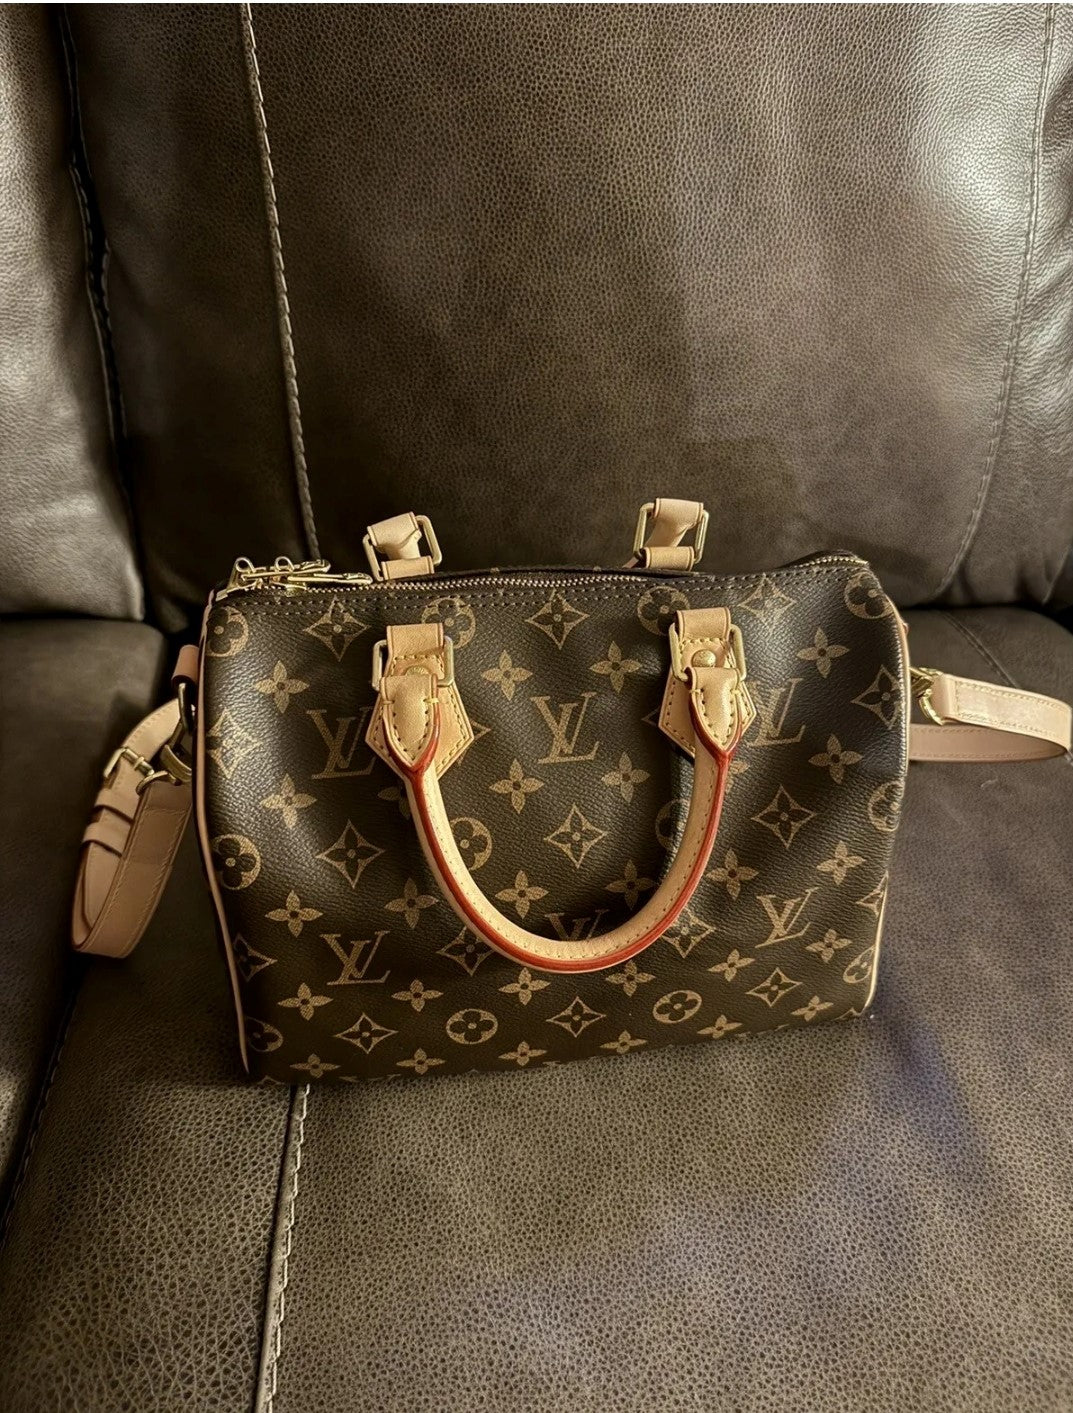 What does a Louis Vuitton "Super Fake" Look Like?